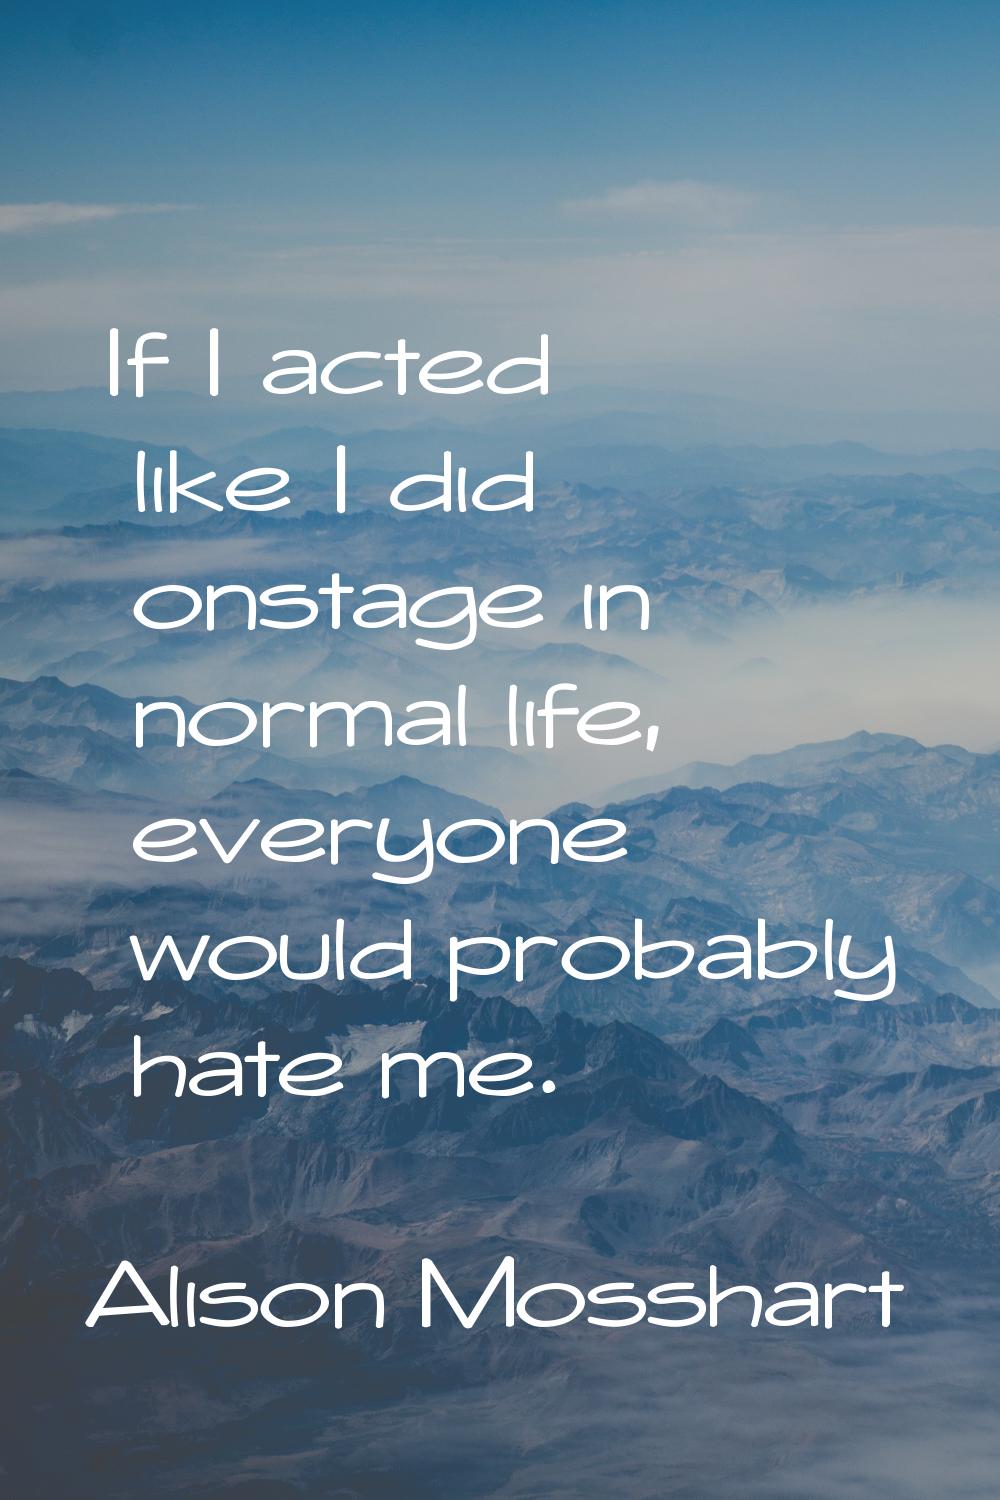 If I acted like I did onstage in normal life, everyone would probably hate me.